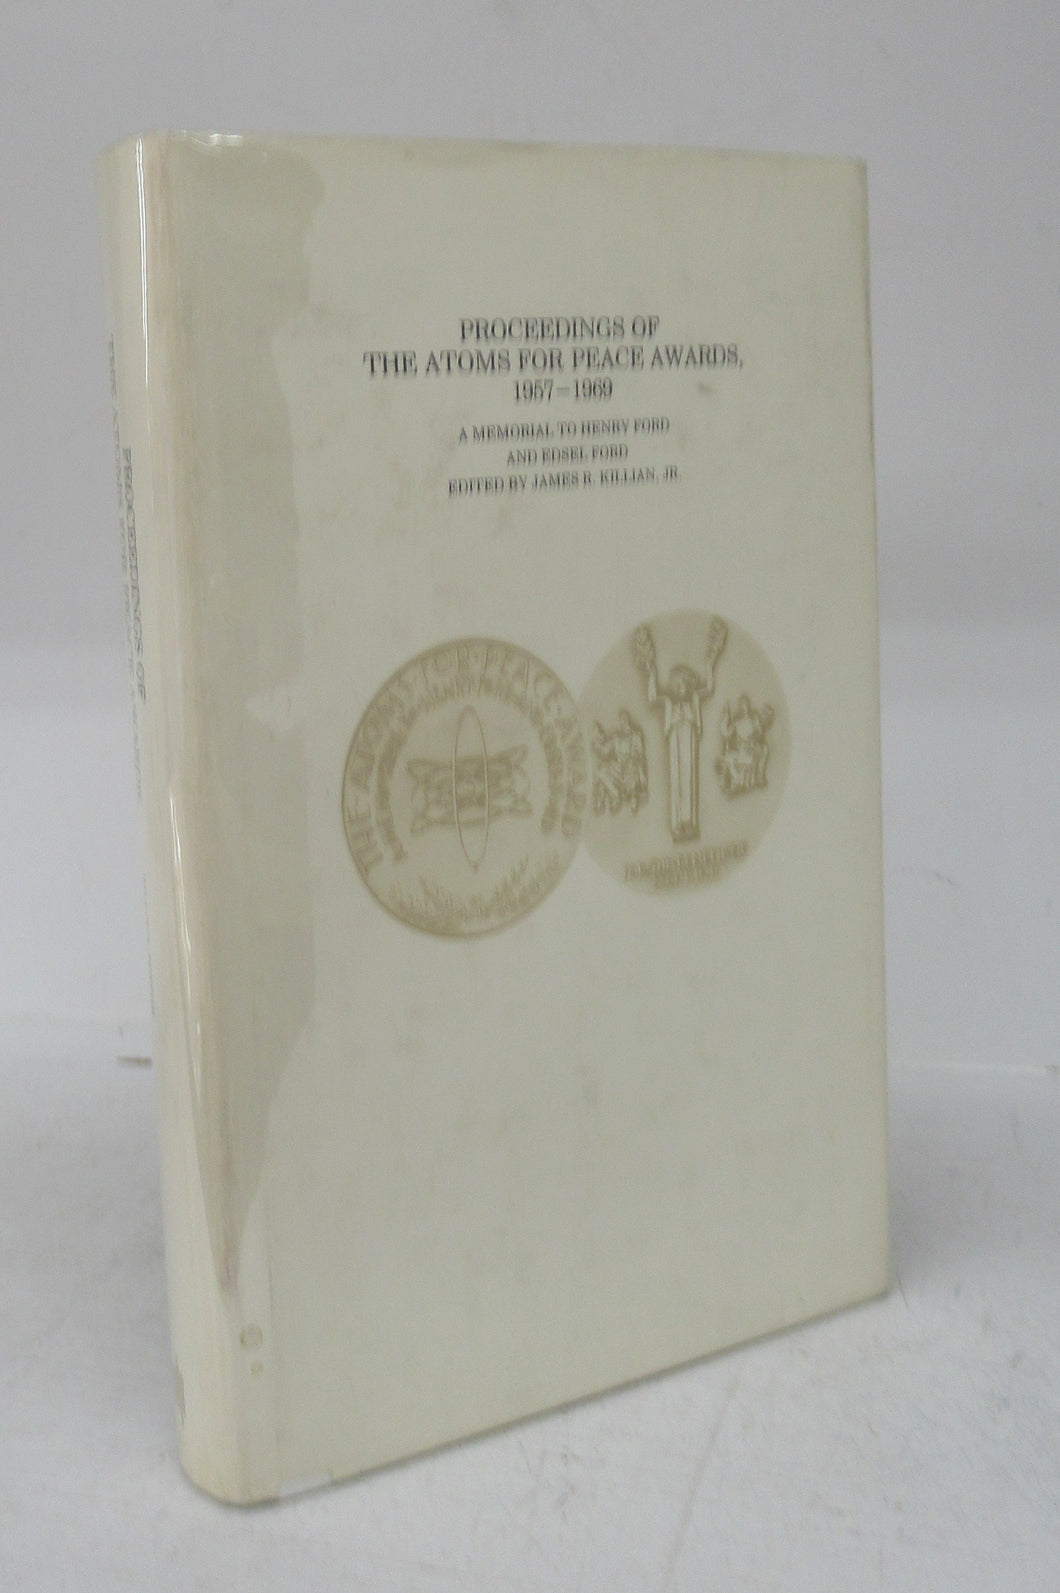 Proceedings of the Atoms for Peace Awards 1957-1969: A Memorial to Henry Ford and Edsel Ford